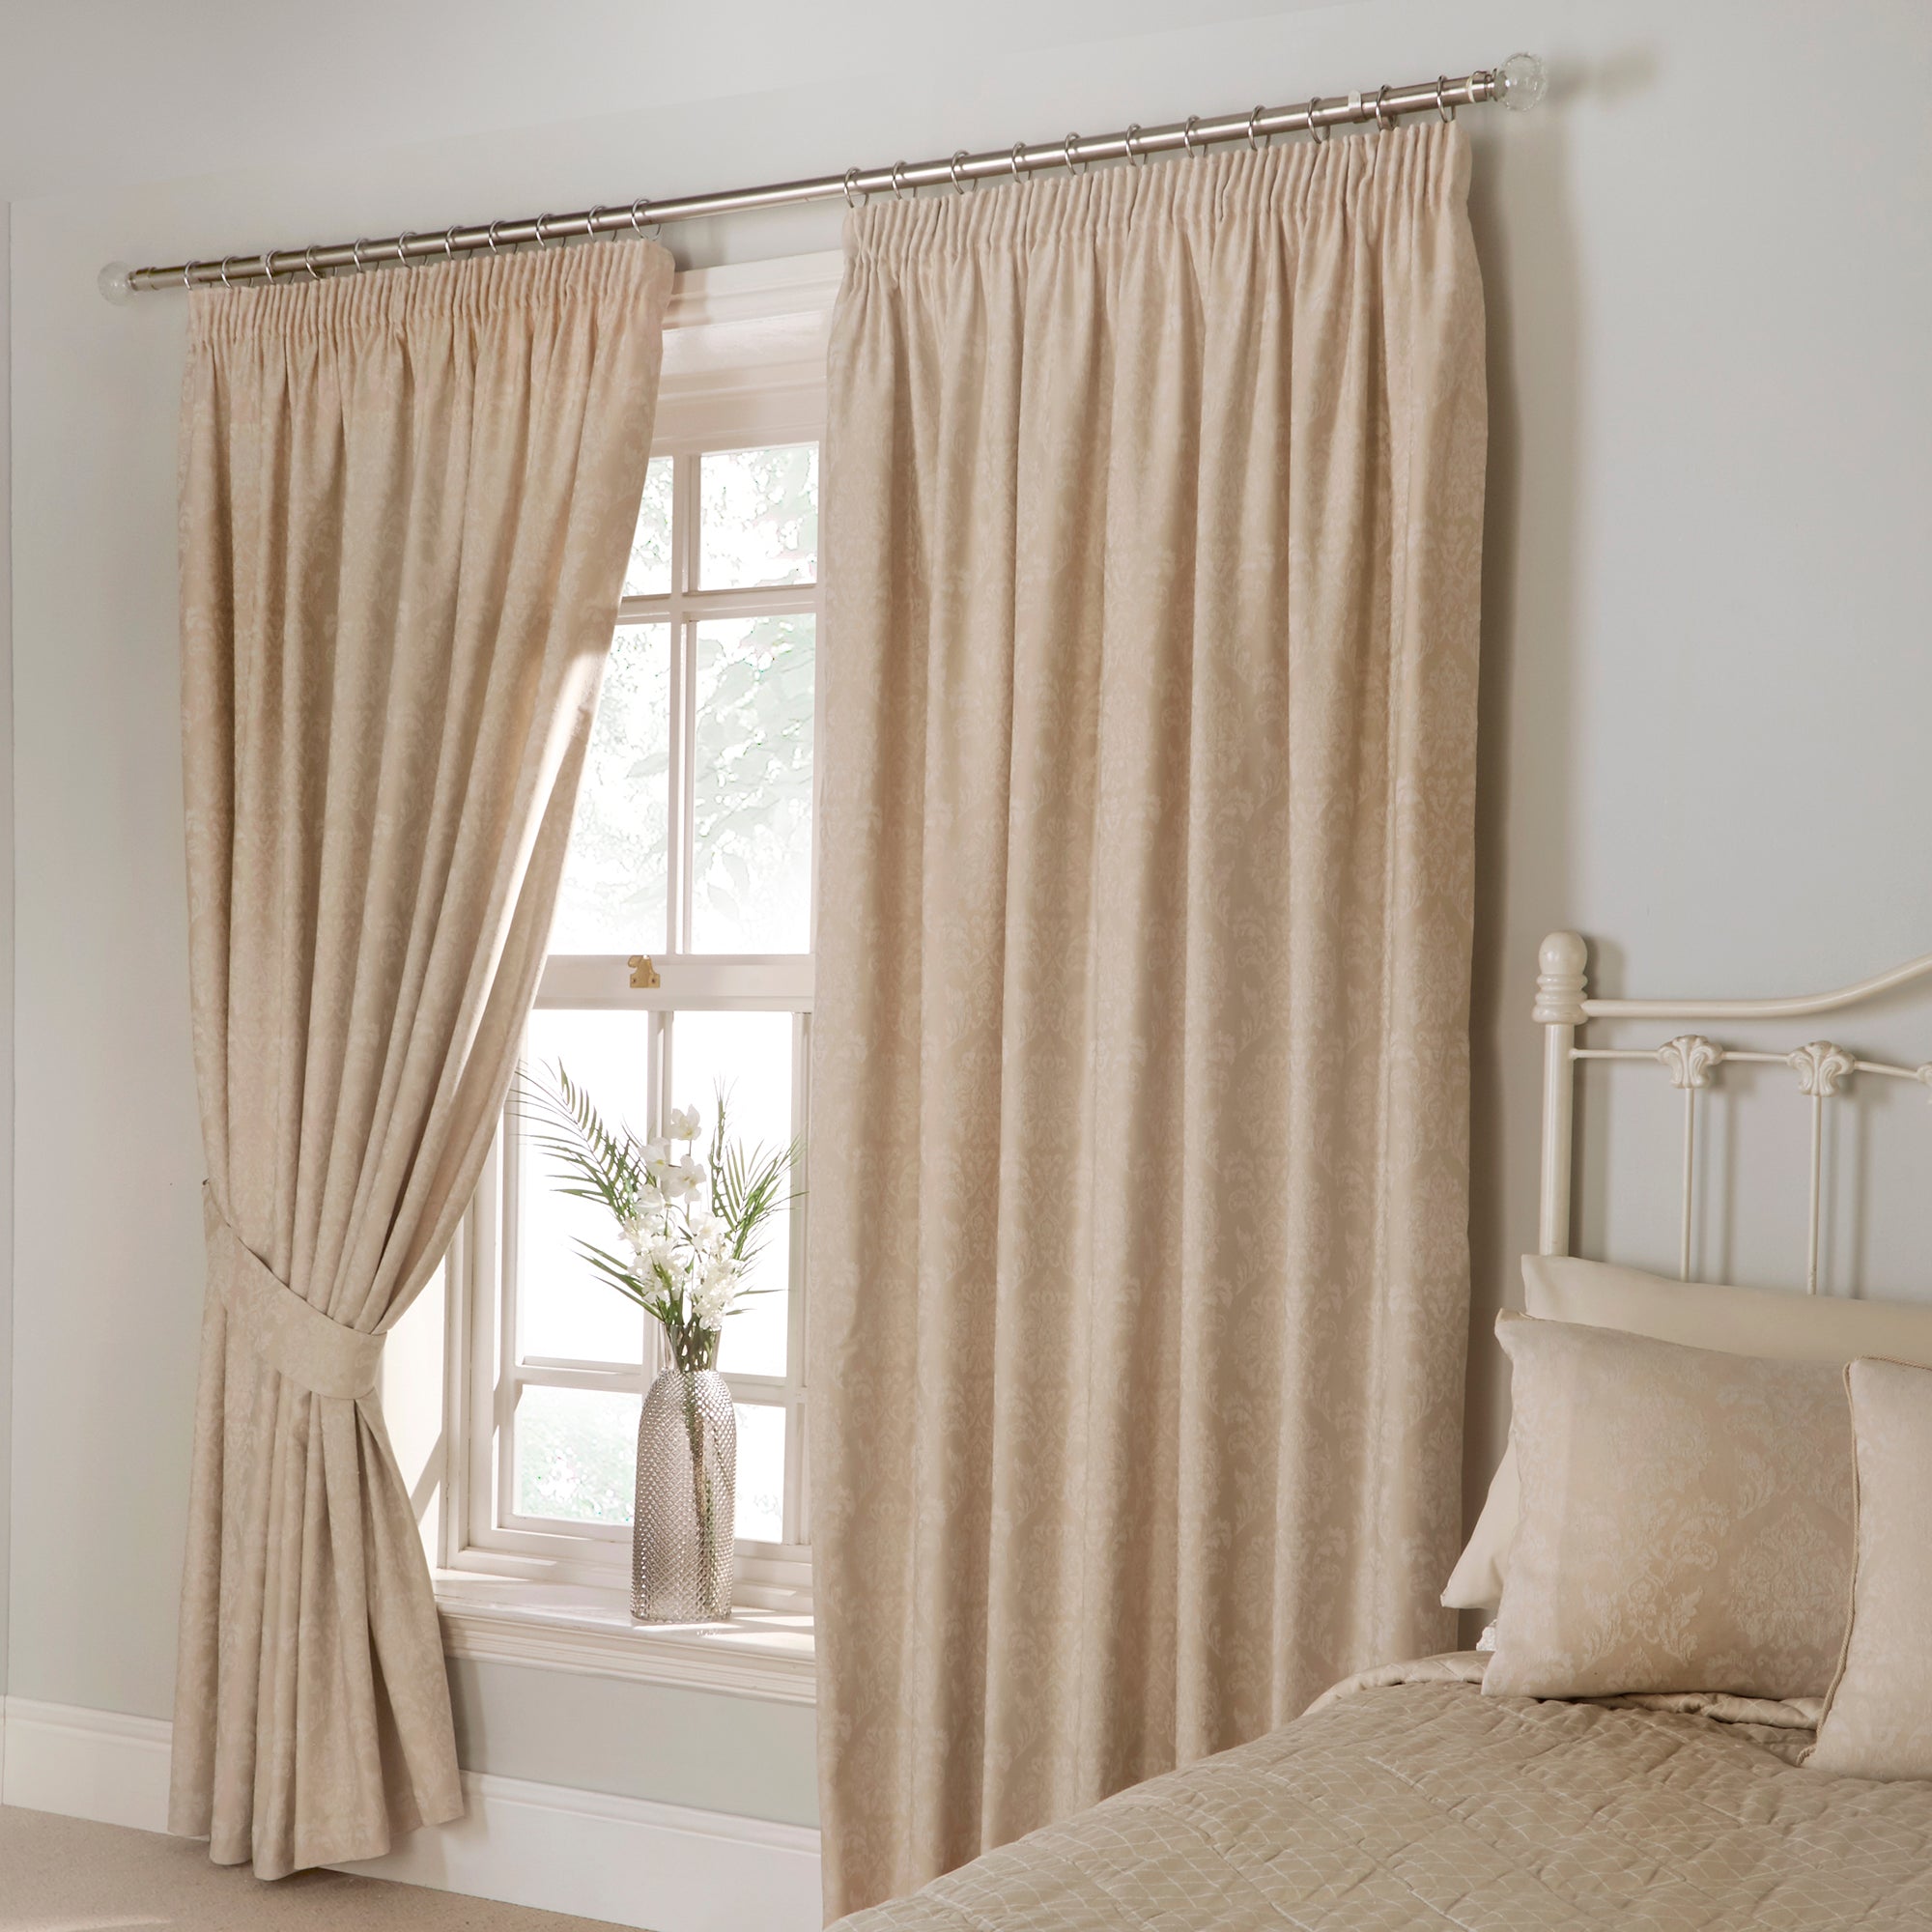 Rosana - Jacquard Duvet Cover Set, Bedspread & Curtains in Soft Gold - by D&D Woven